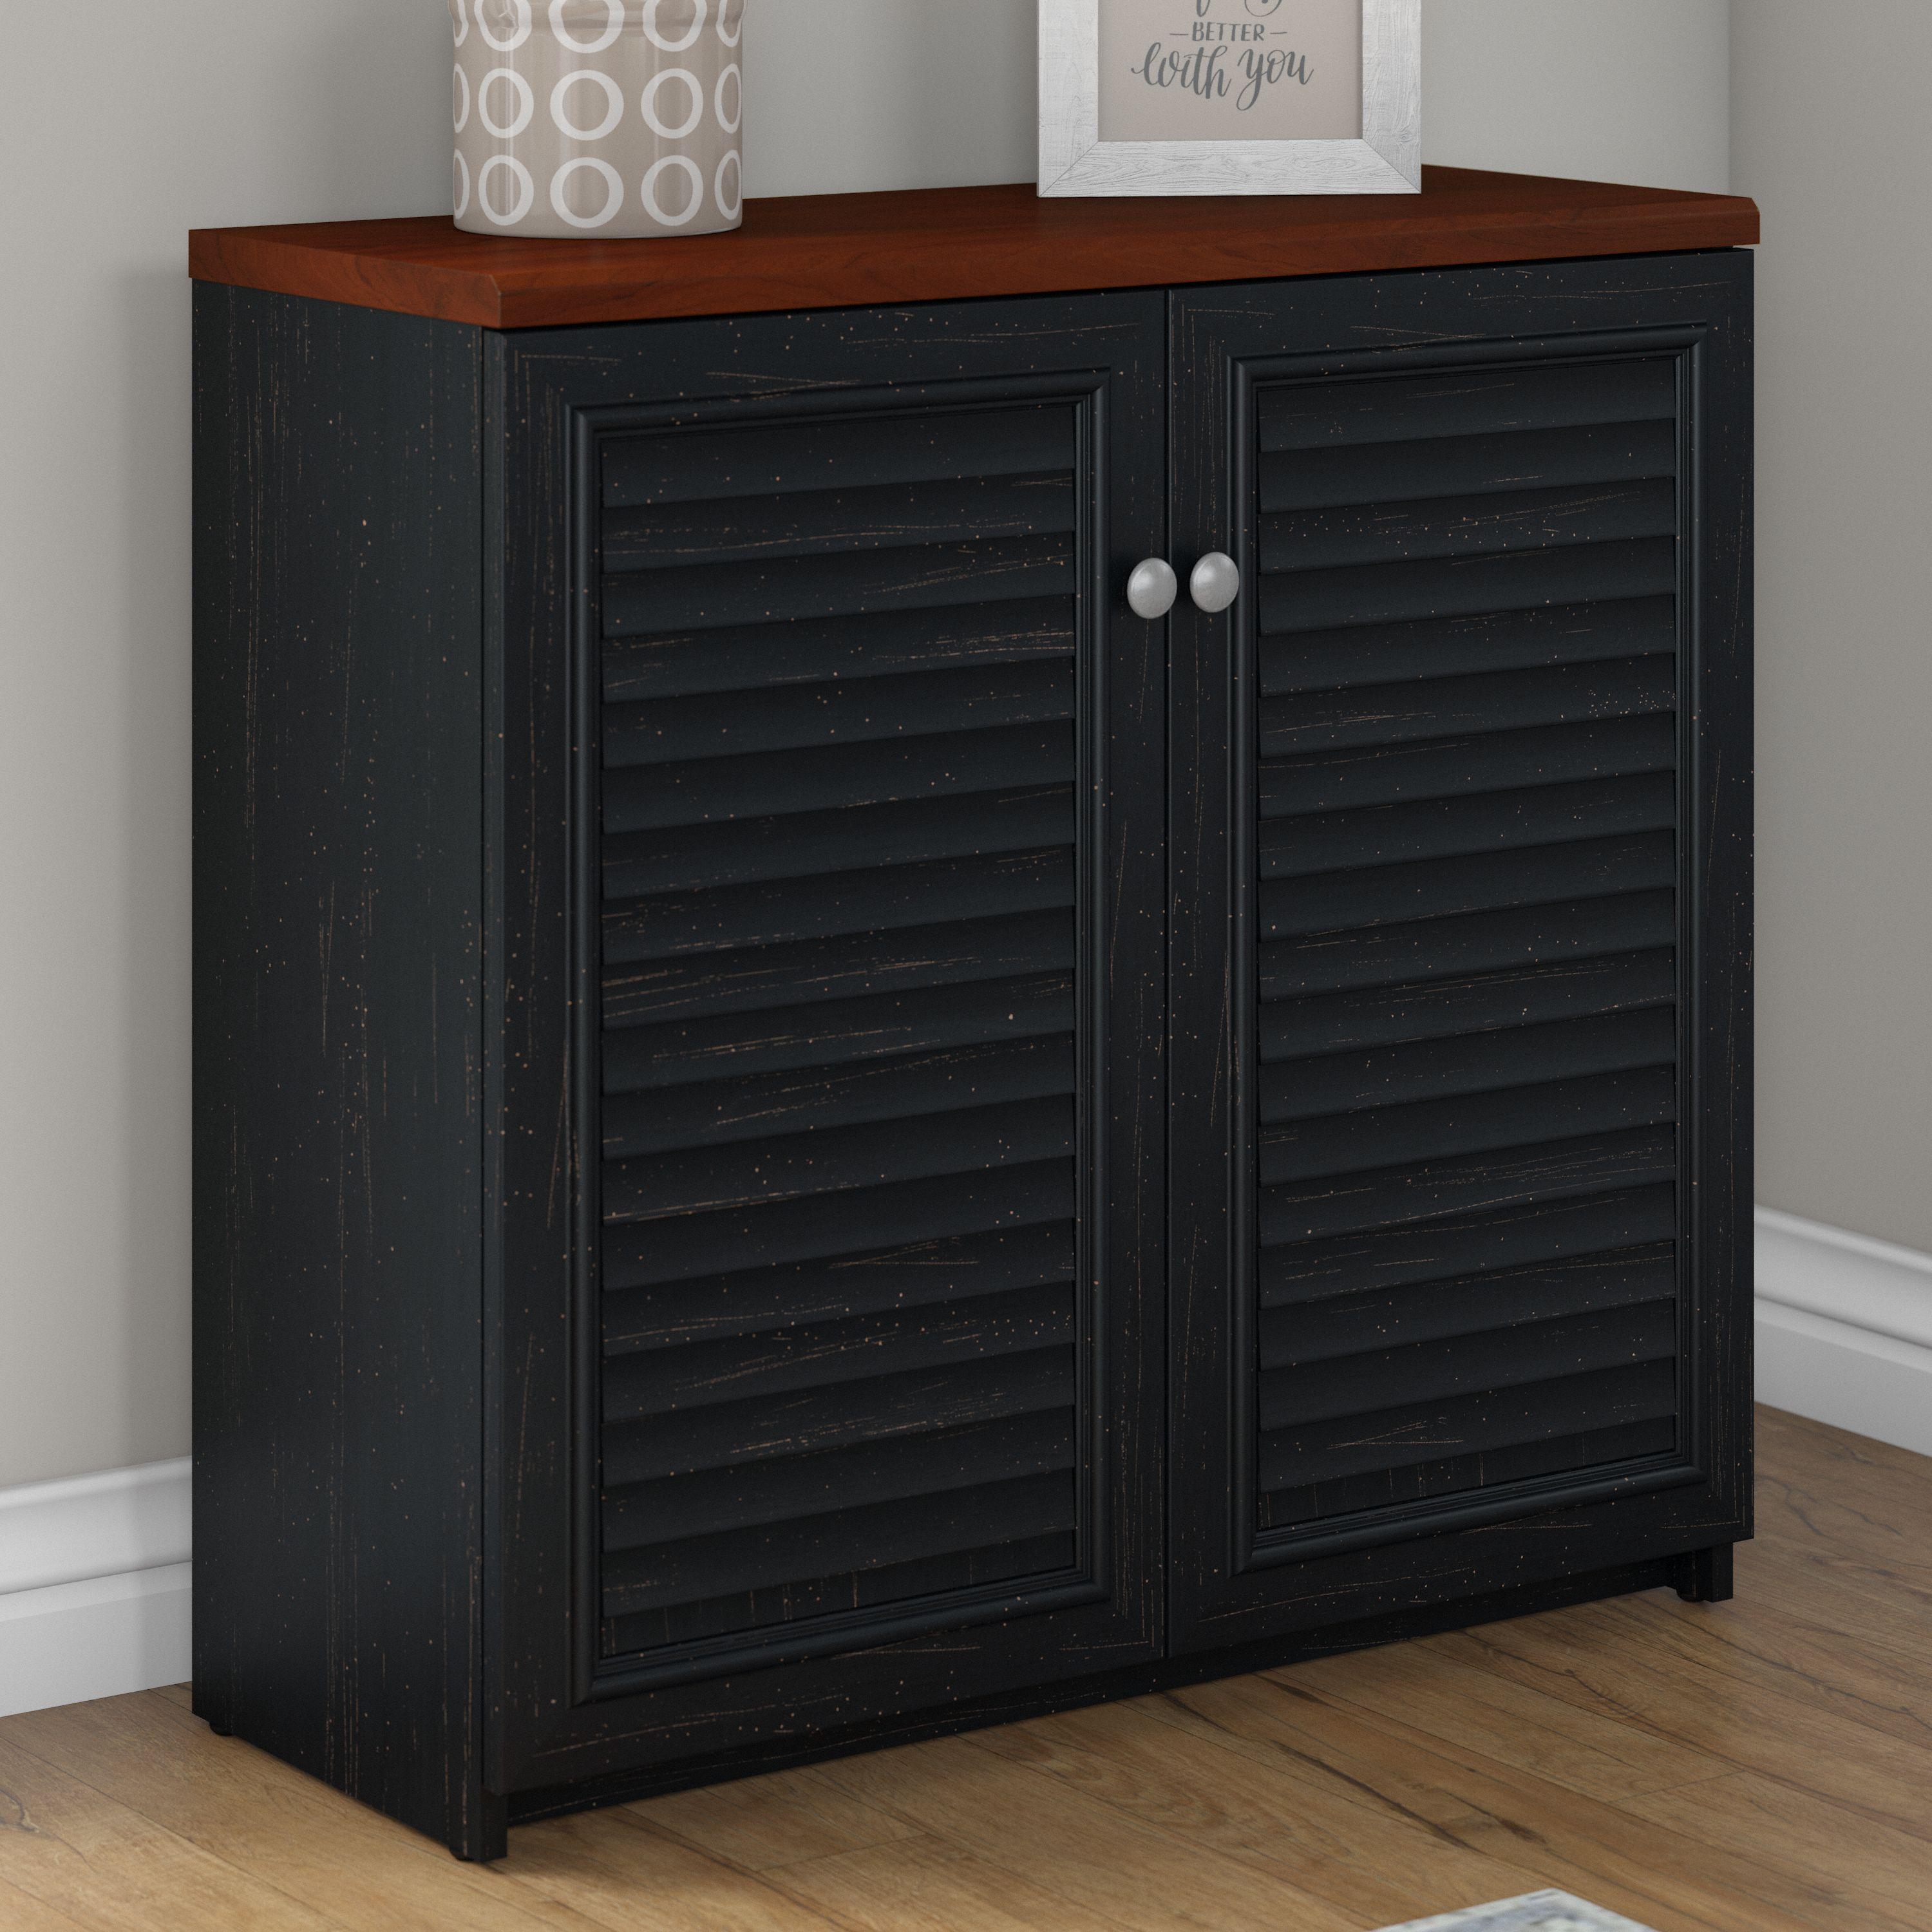 Shop Bush Furniture Fairview Small Storage Cabinet with Doors and Shelves 01 WC53996-03 #color_antique black/hansen cherry